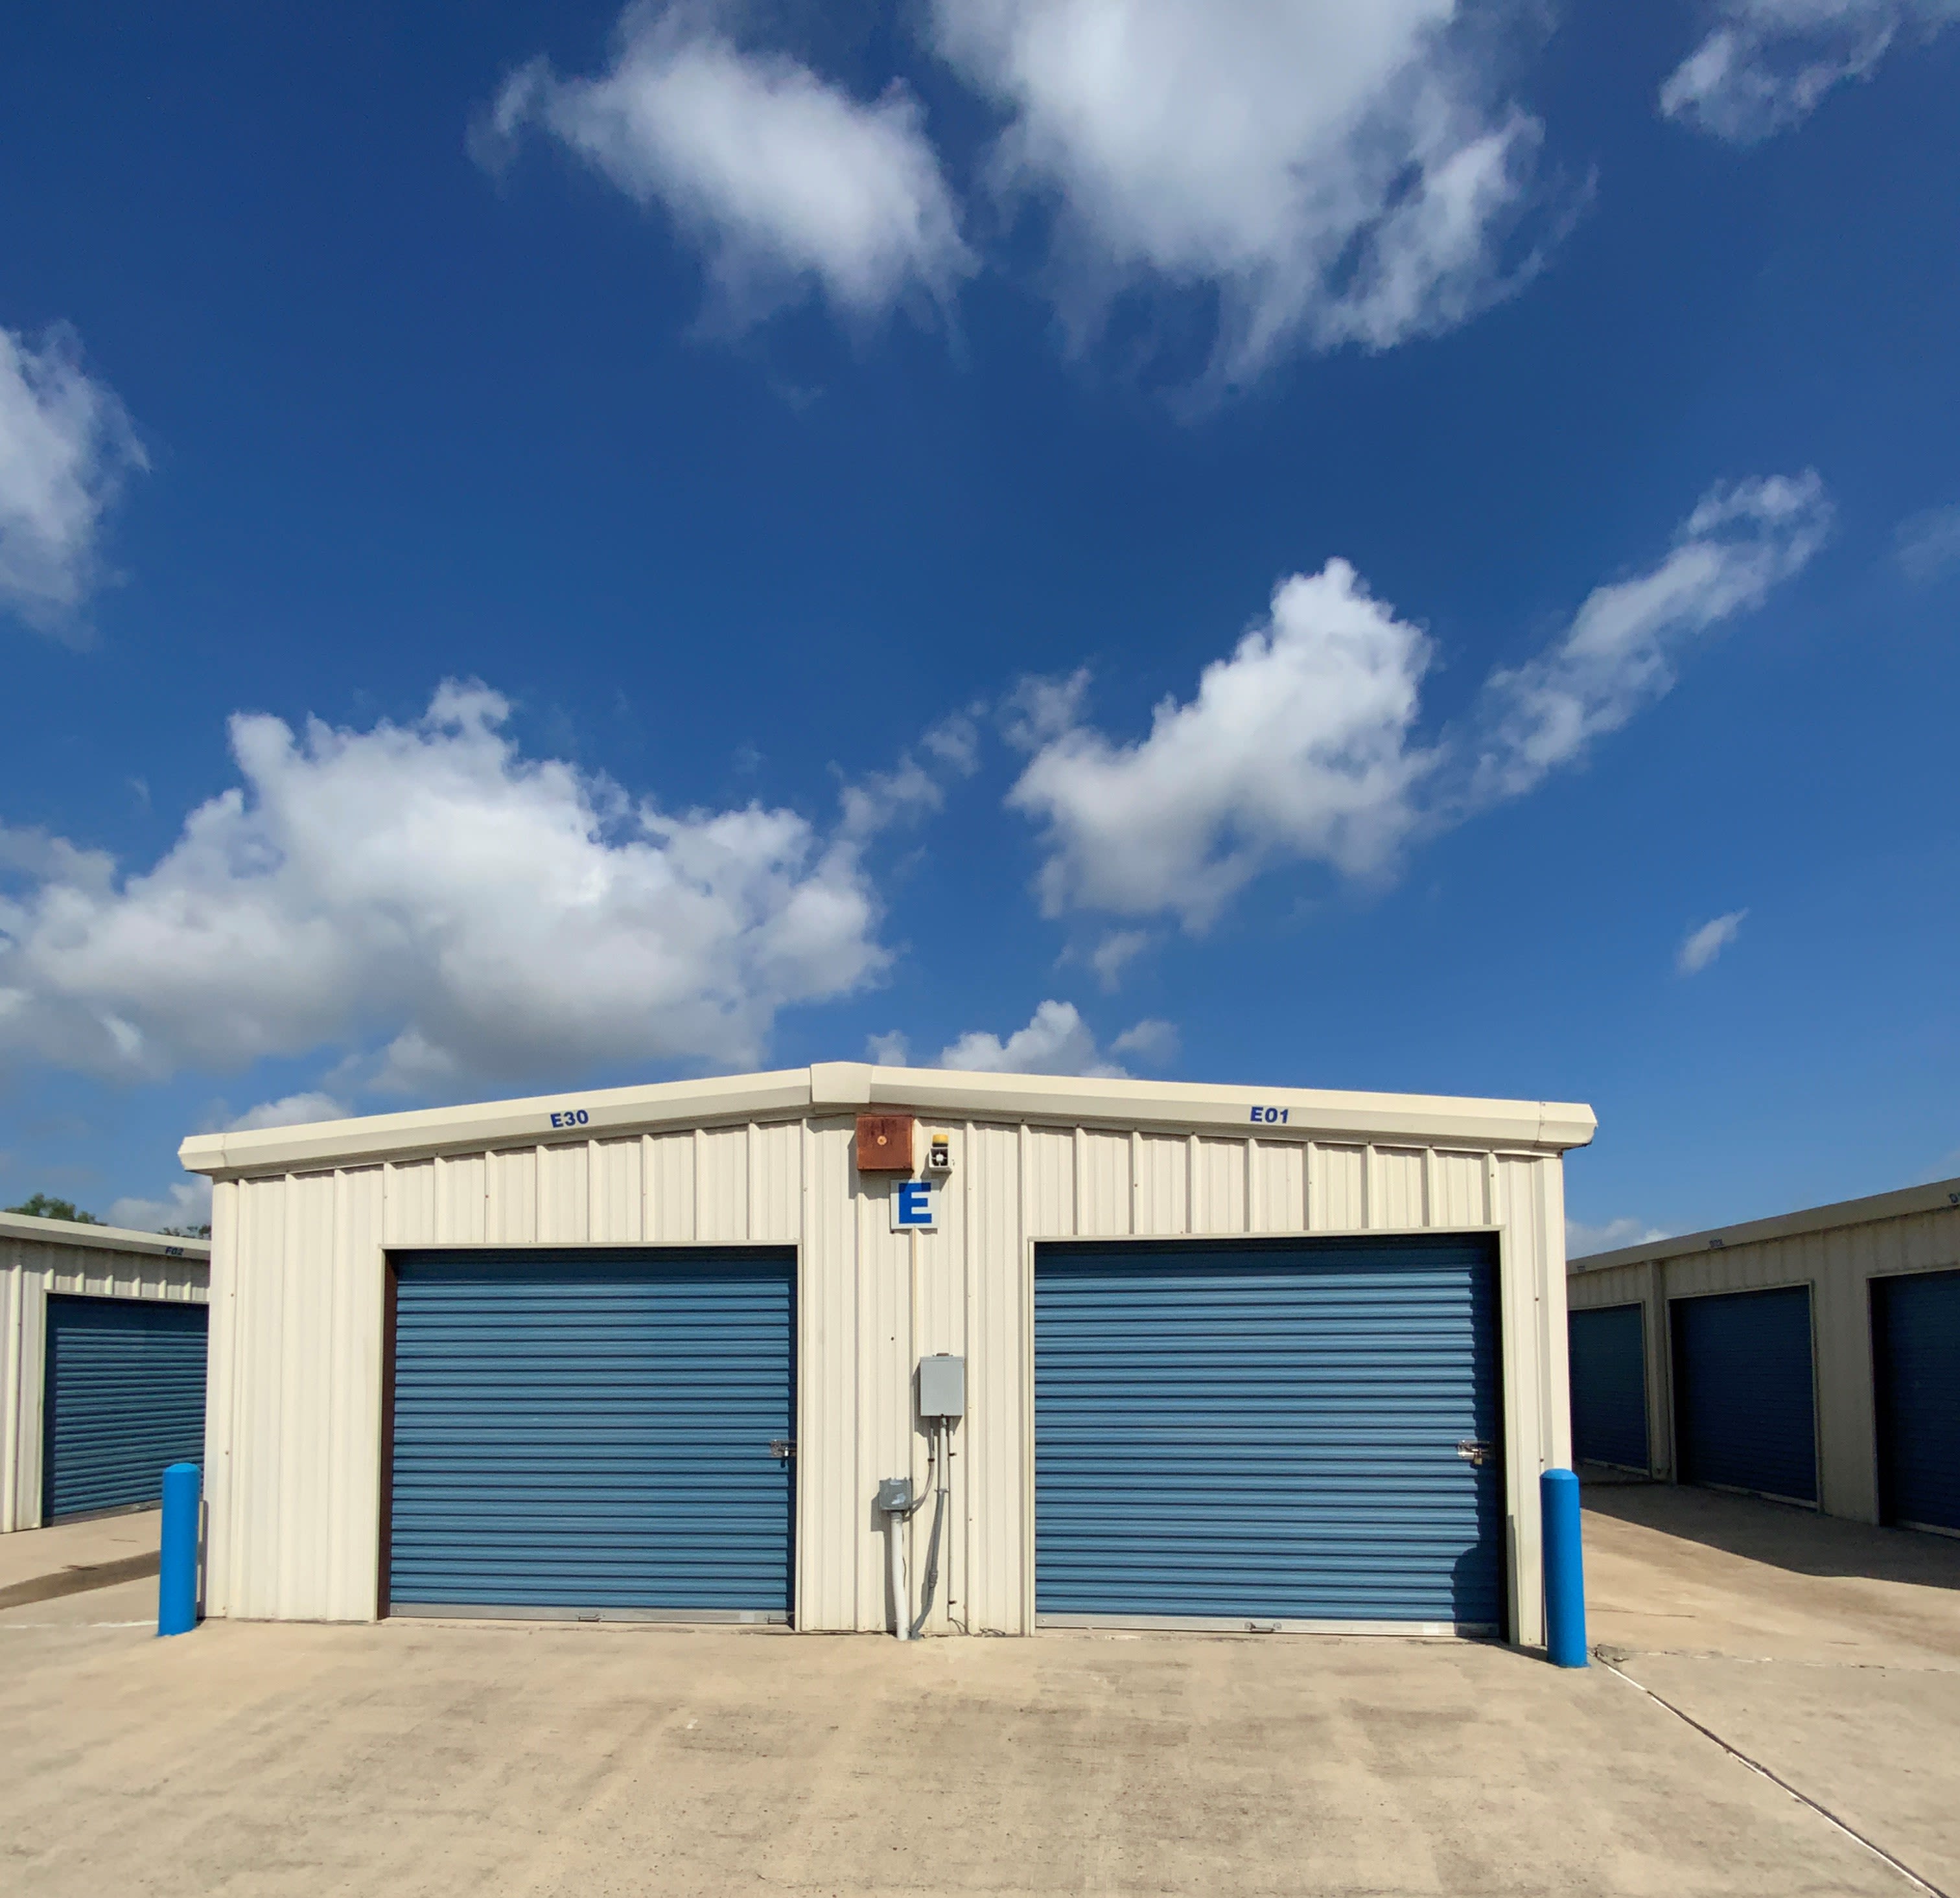 View our list of features at KO Storage of San Benito in San Benito, Texas